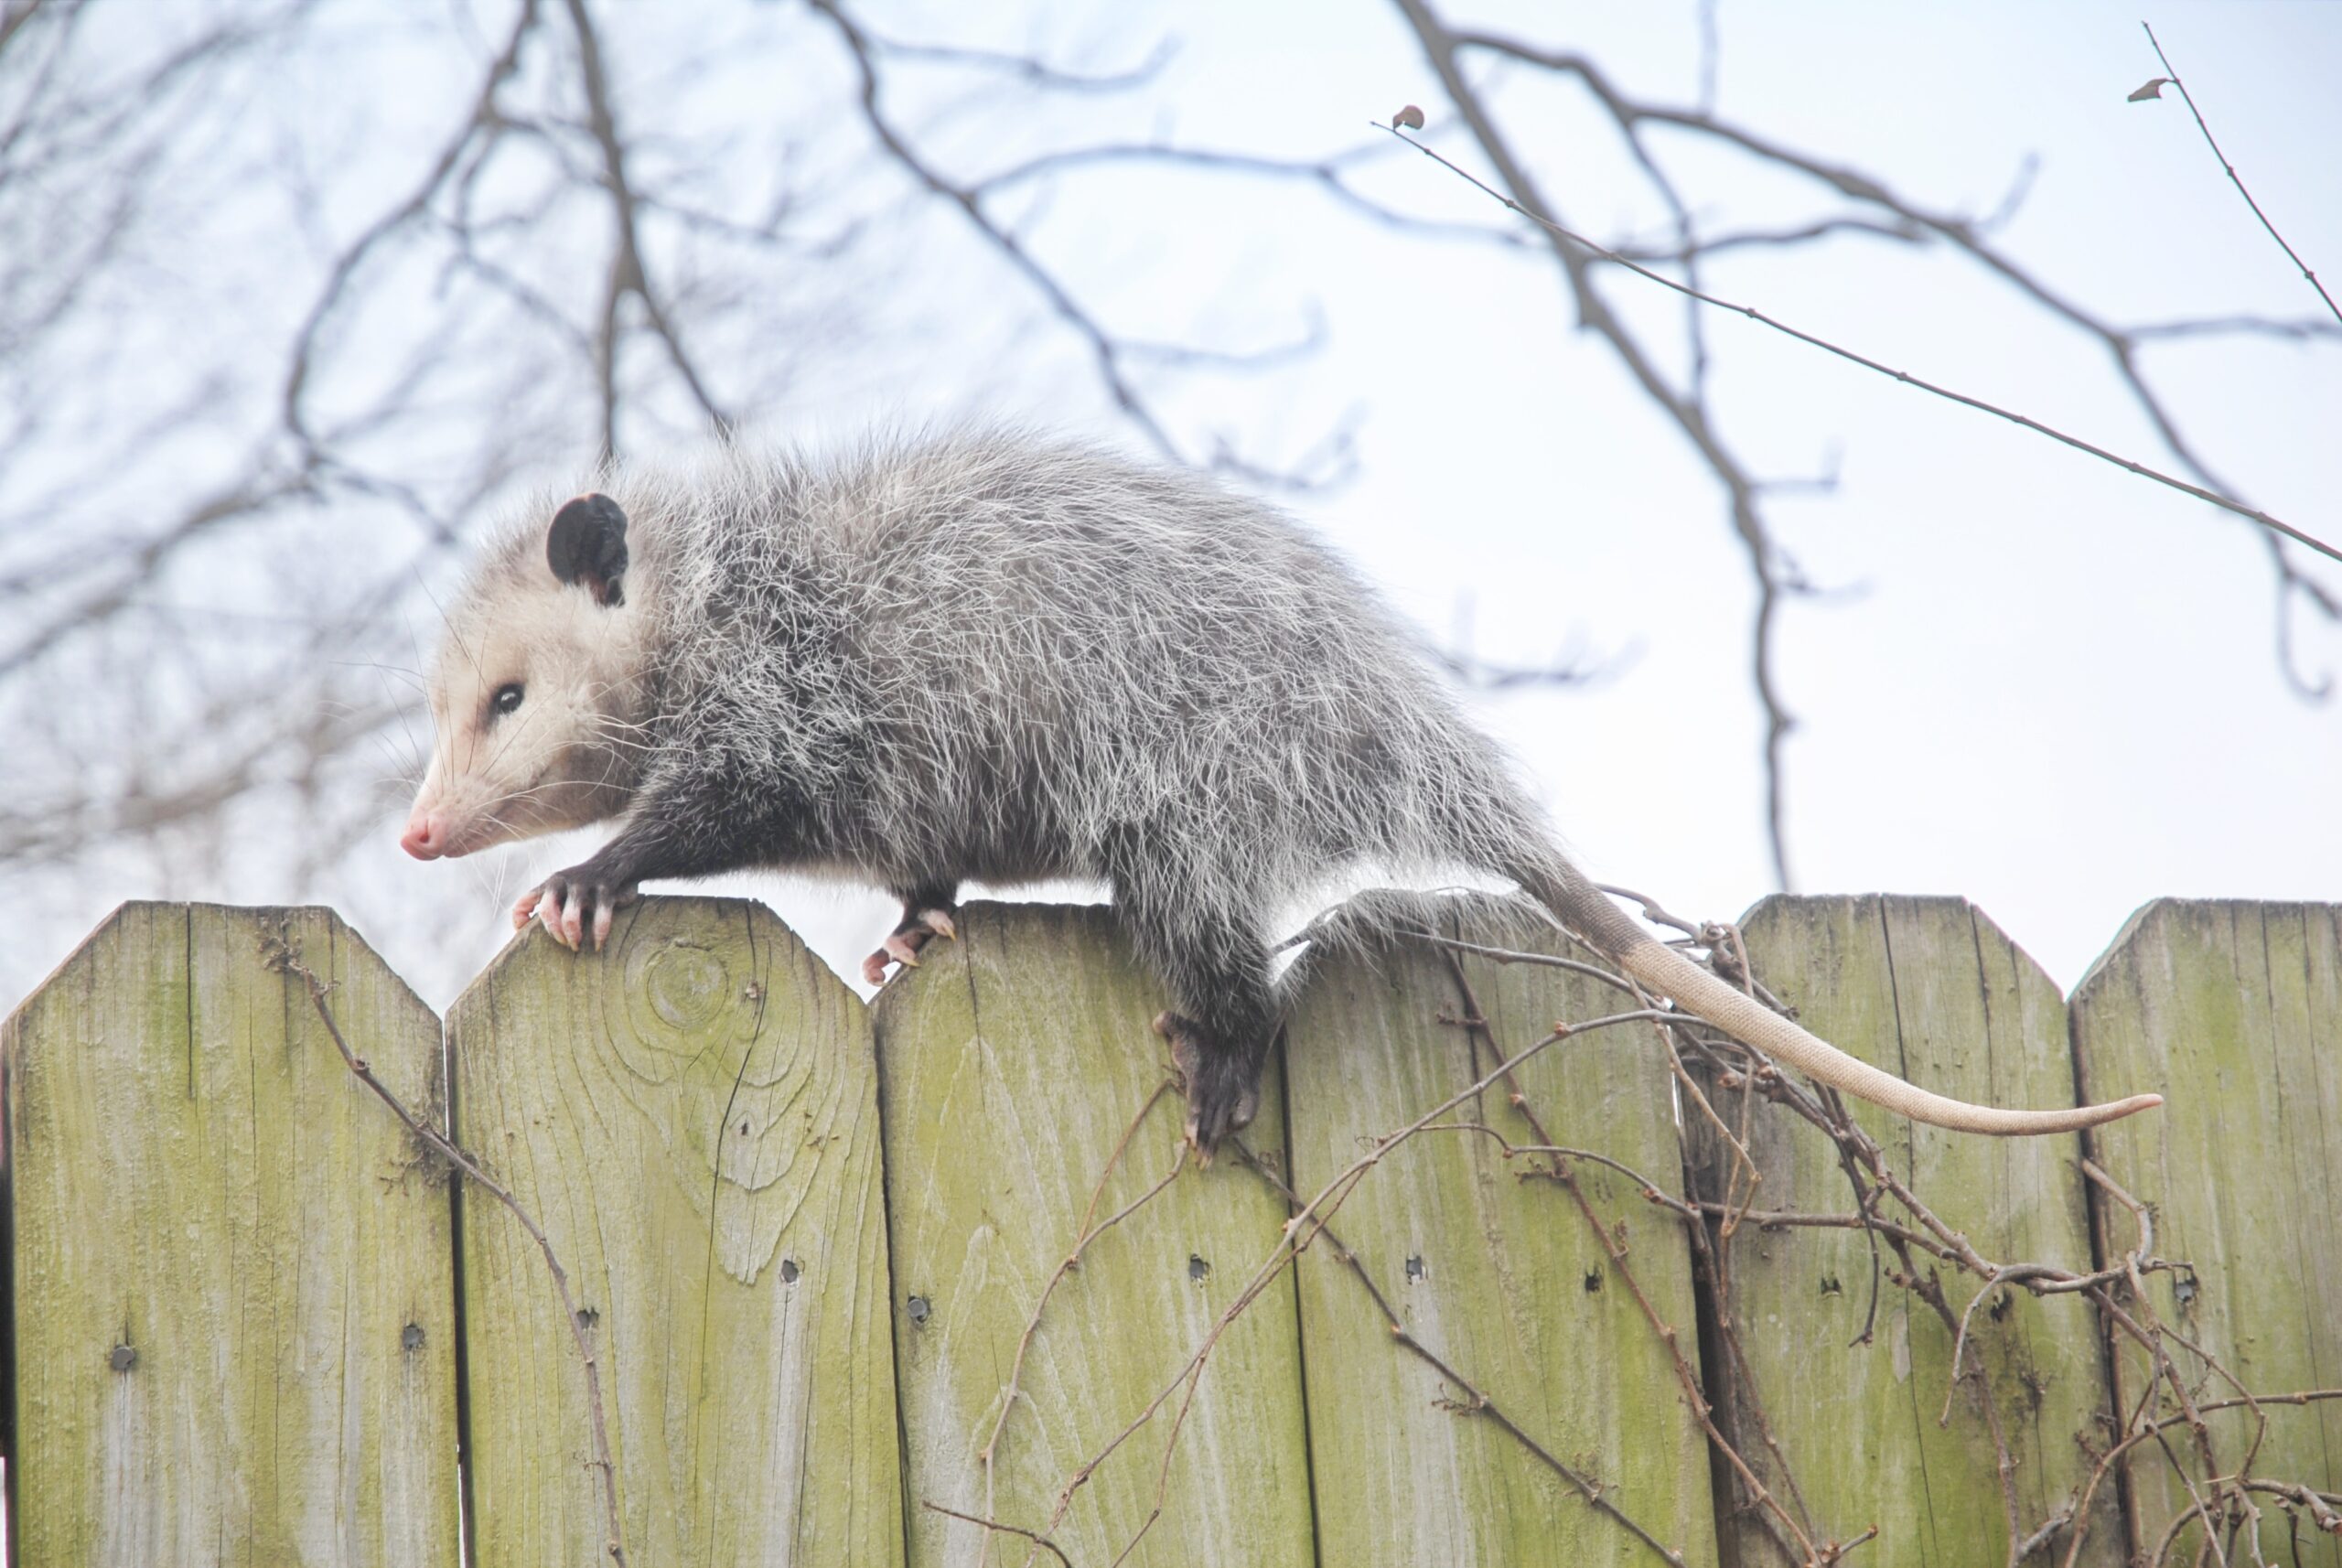 Opossum walking on the fence